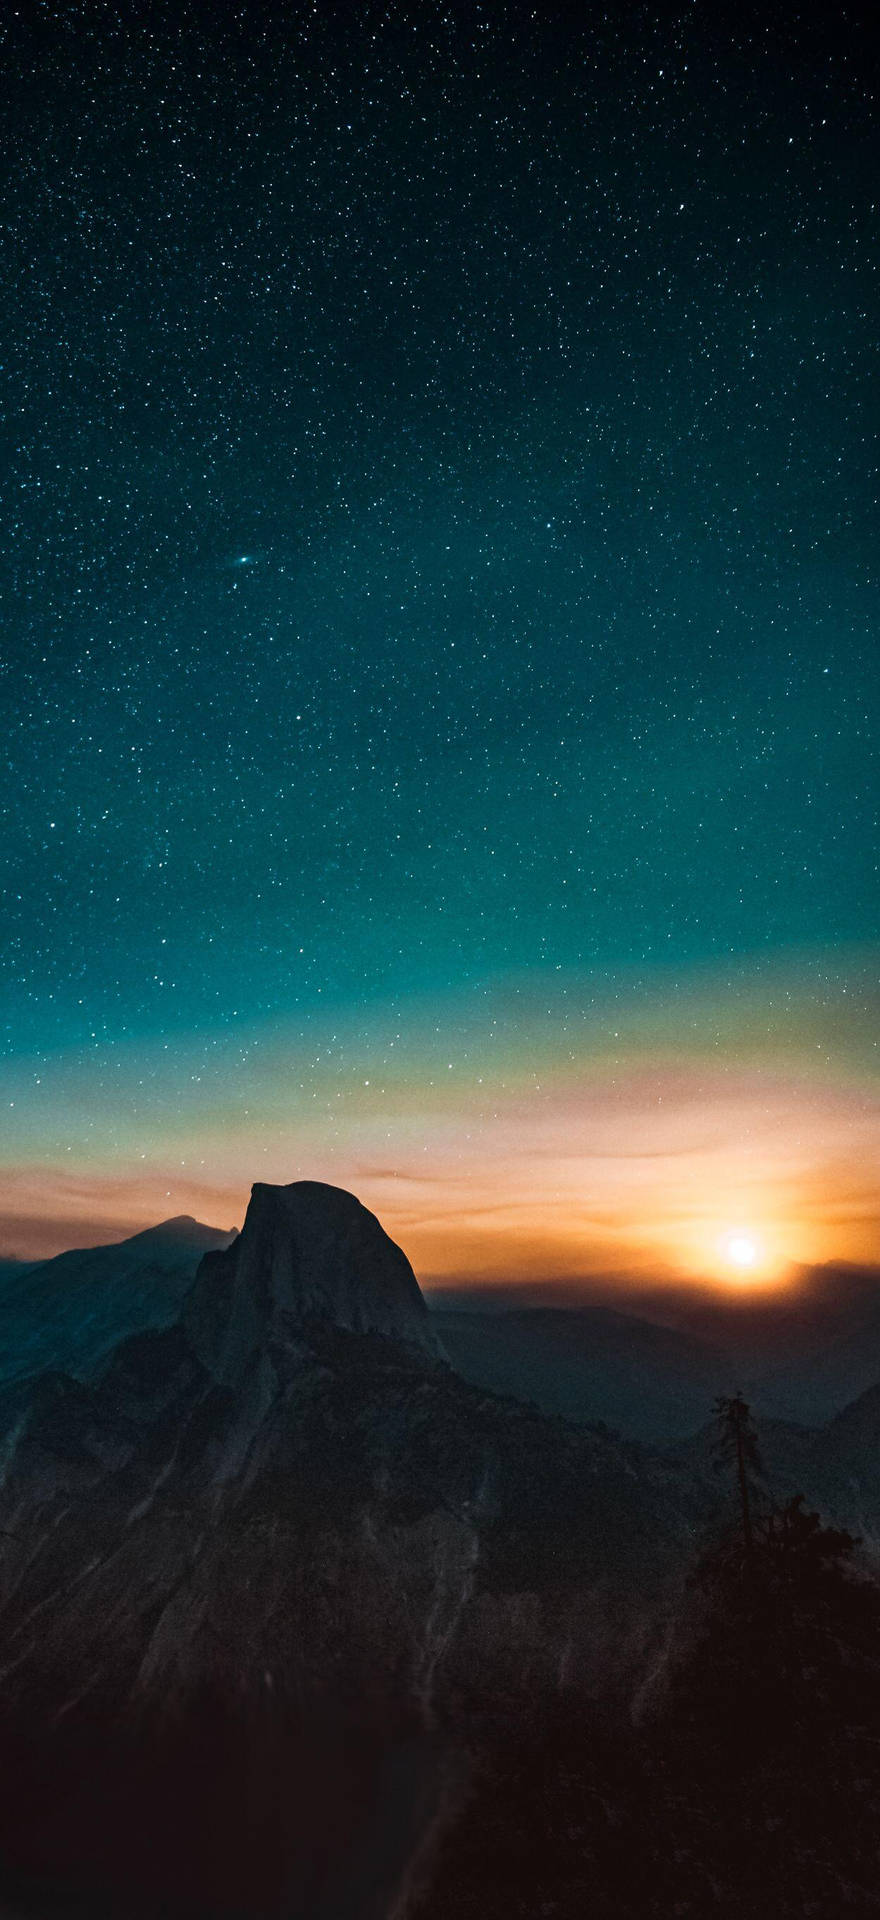 Cool Iphone Xs Max Starry Mountain Wallpaper